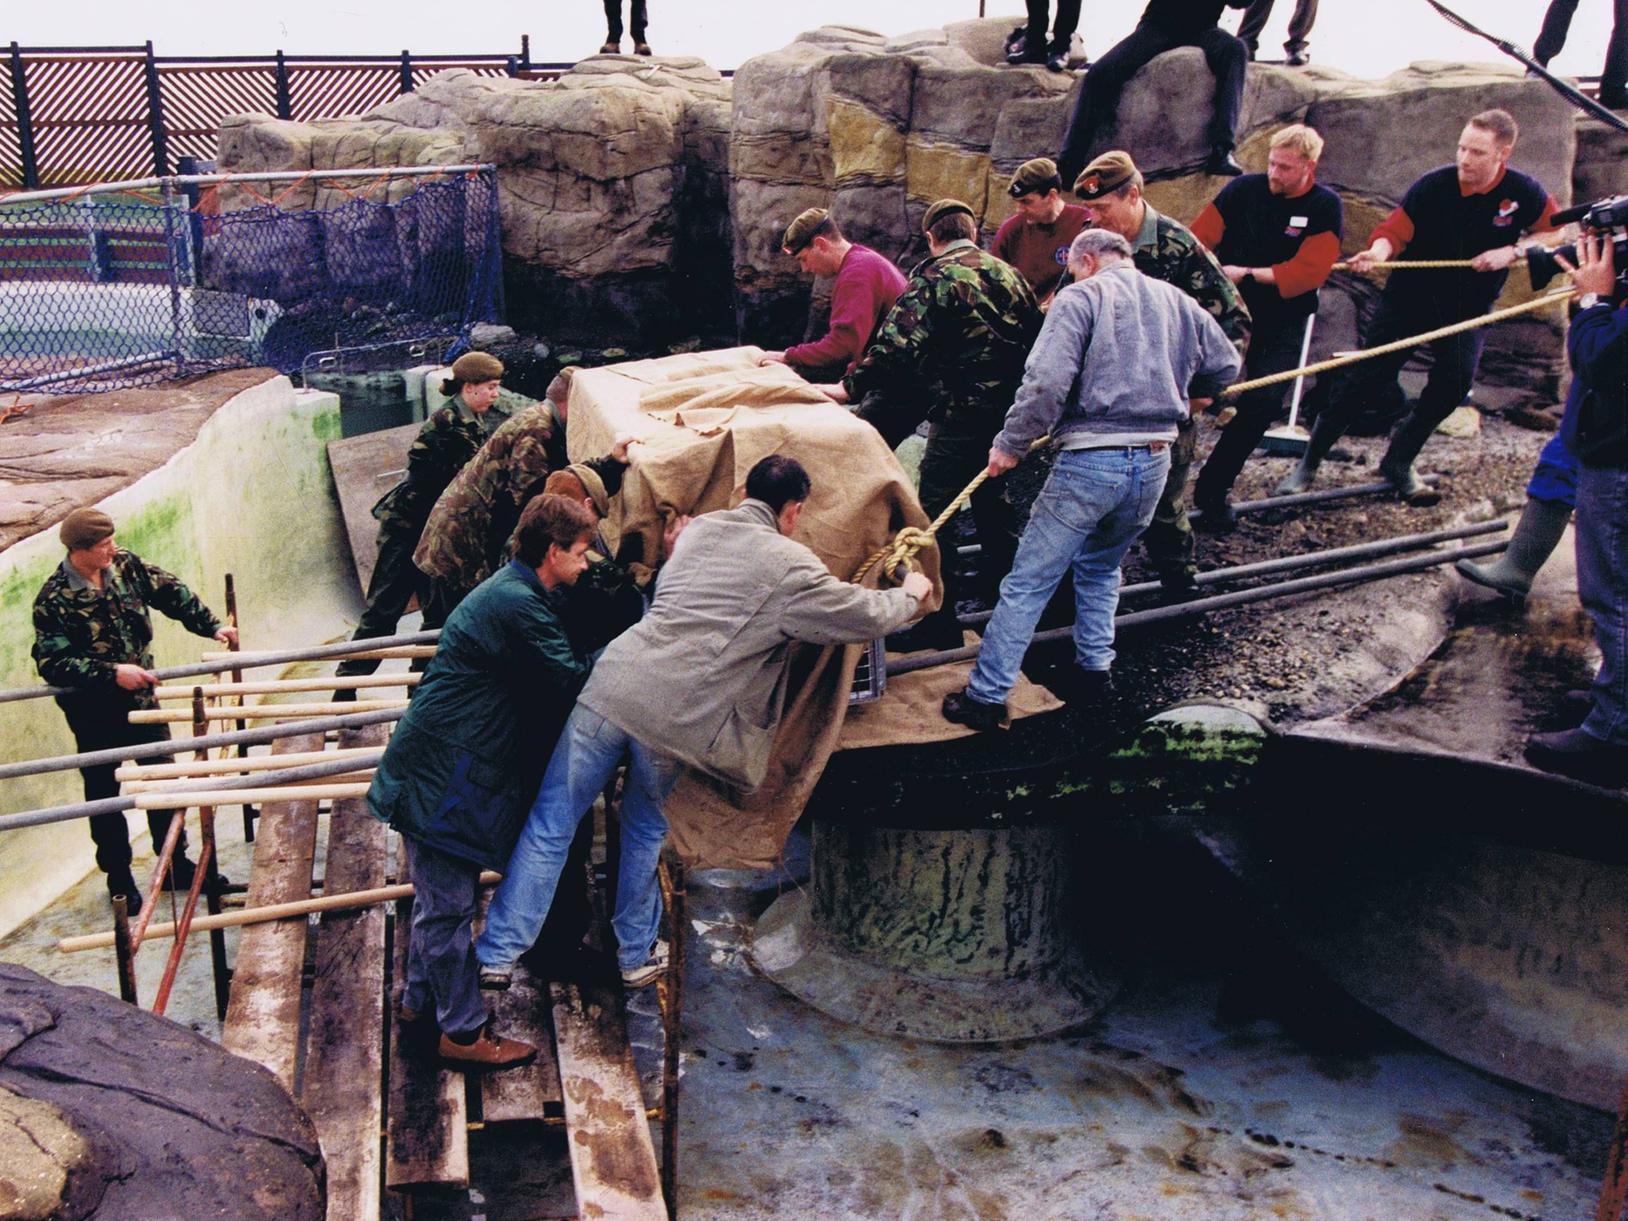 4th/5th Battalions, The Green Howards, A Coy. rescuing Magnus the seal at the Sea Life Centre, Scarborough for Channel Four's 'Pet Rescue', December 1997